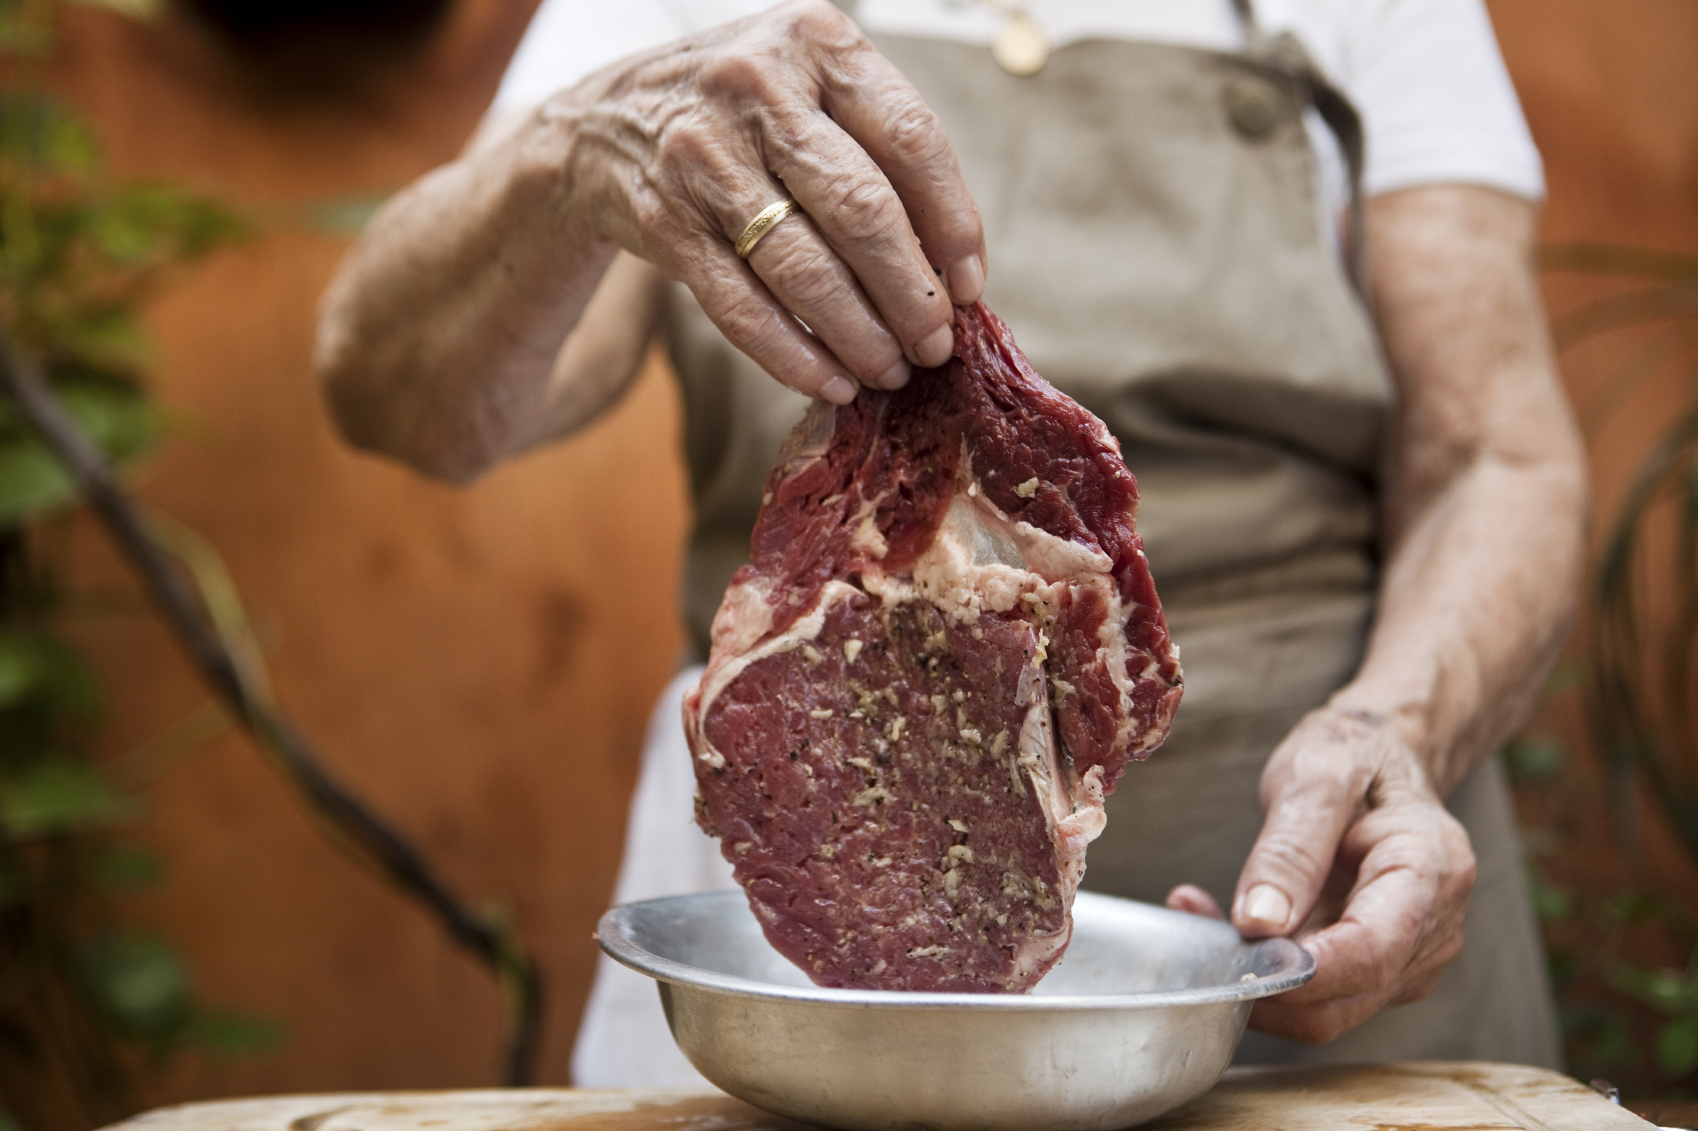 Red meat is a complete protein source. But you can have too much of a good thing... New research reveals a simple compound in it could be raising your cancer risk.